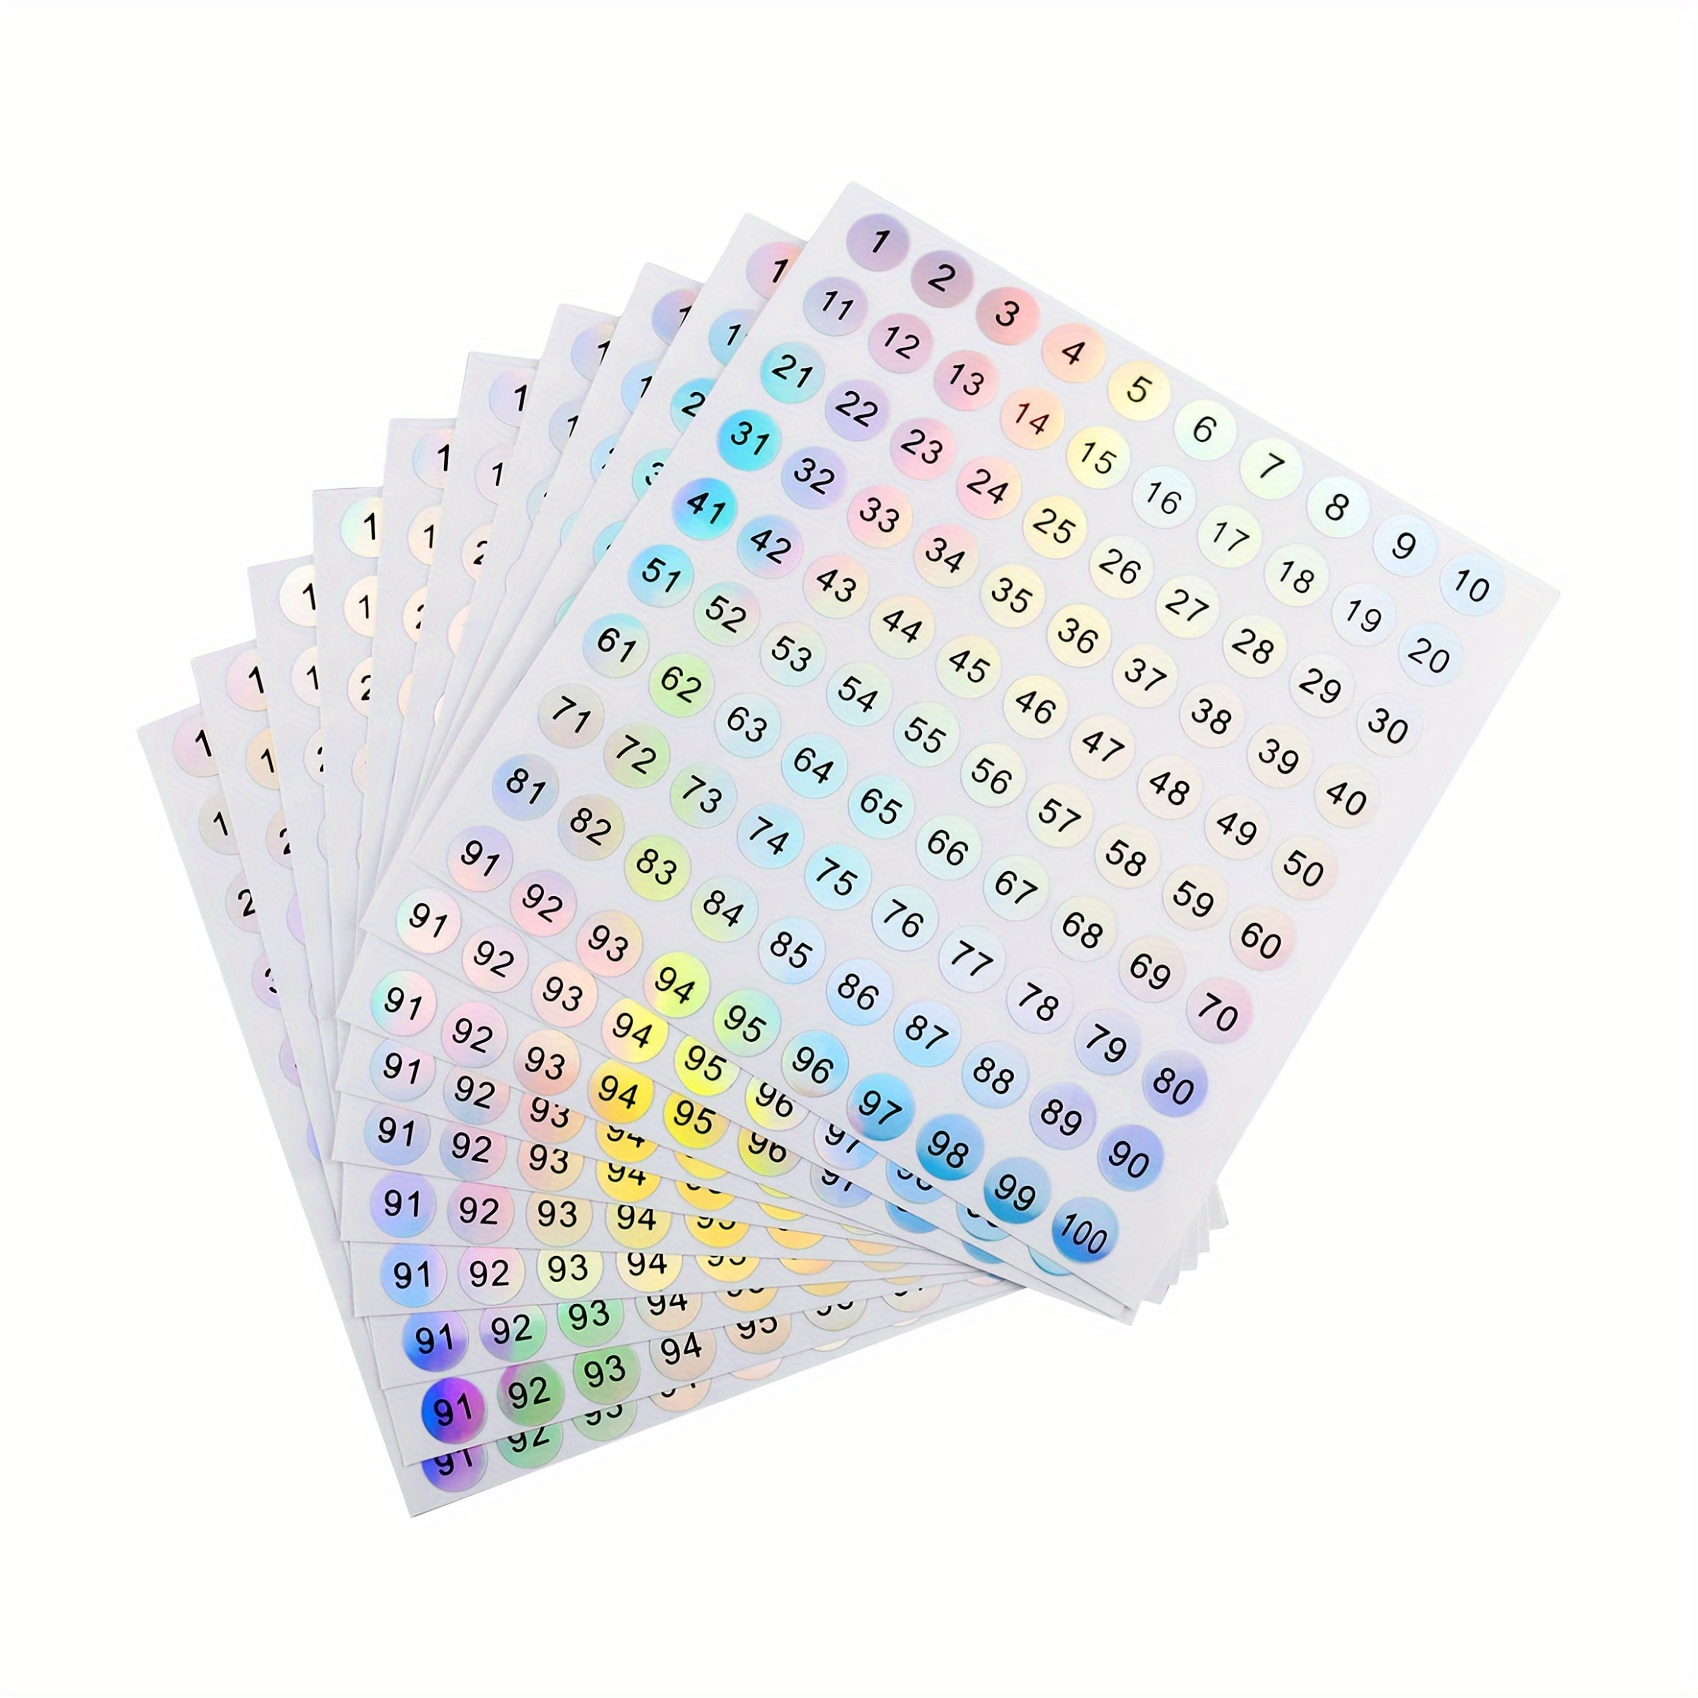 15 Sheets Small Number Stickers Round Number Sticker 1-100 Number Sticker